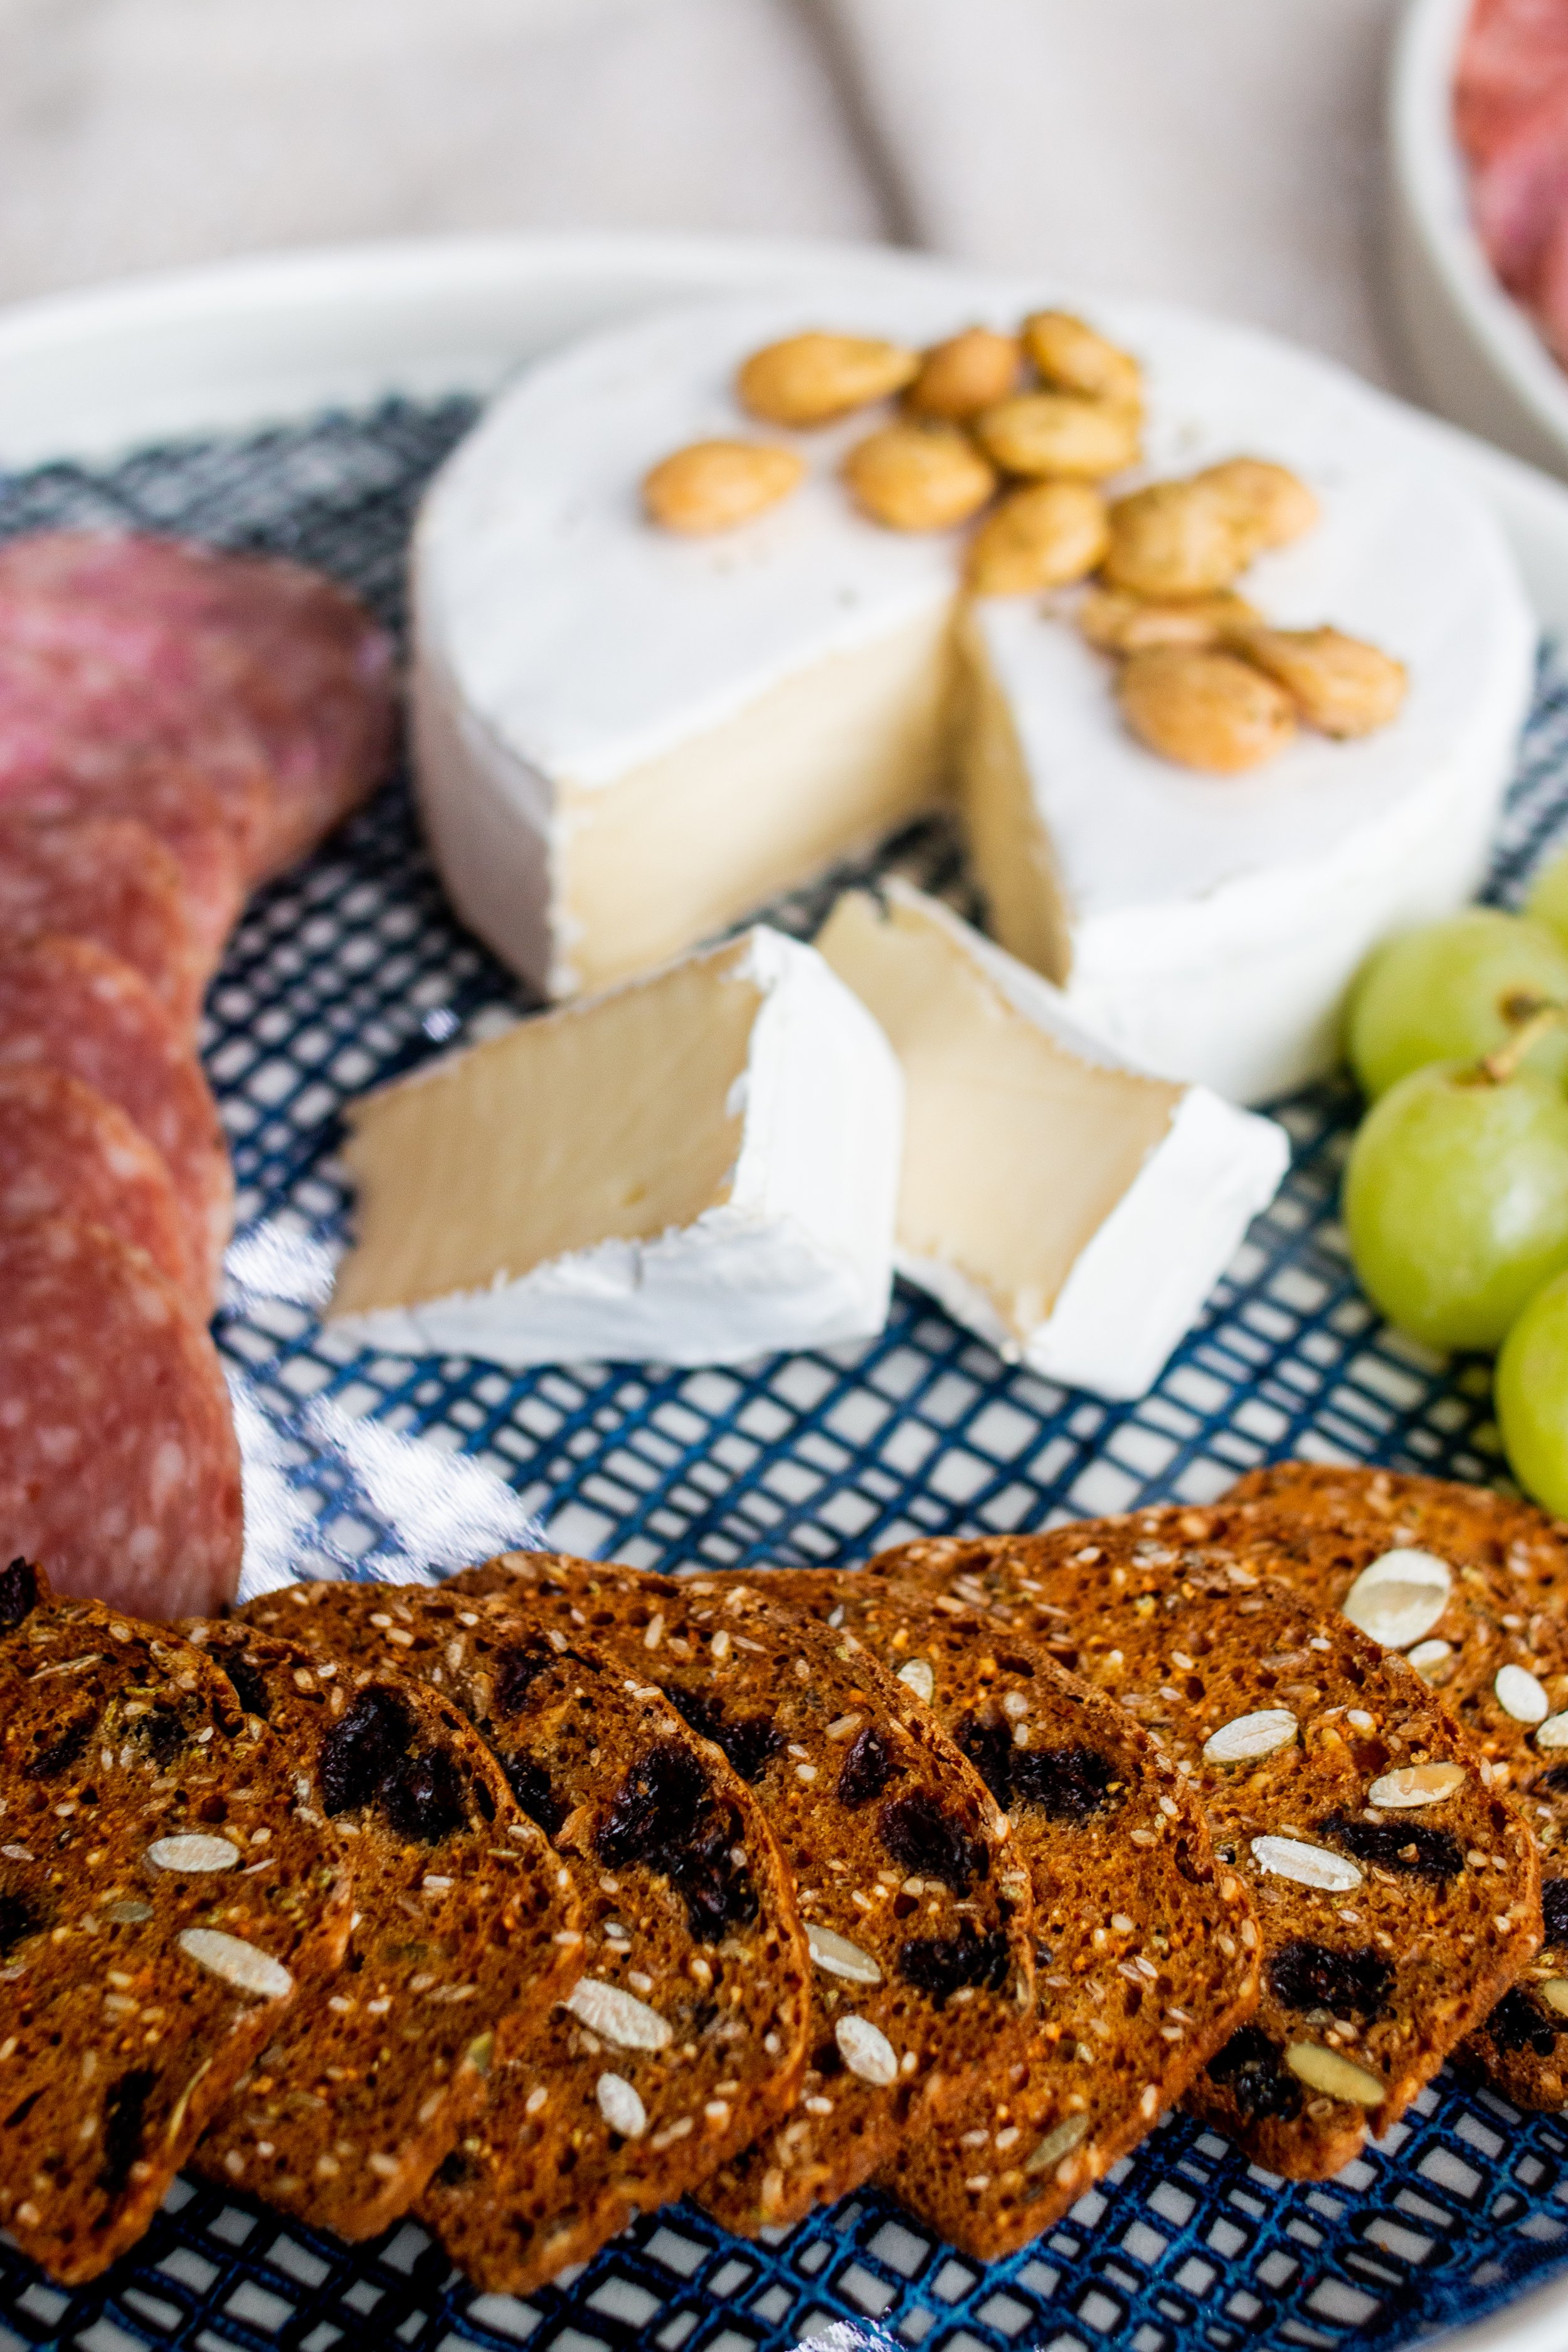  A closeup image of cheese, meat and bread on a handmade plate created by Lauren HB Studio 